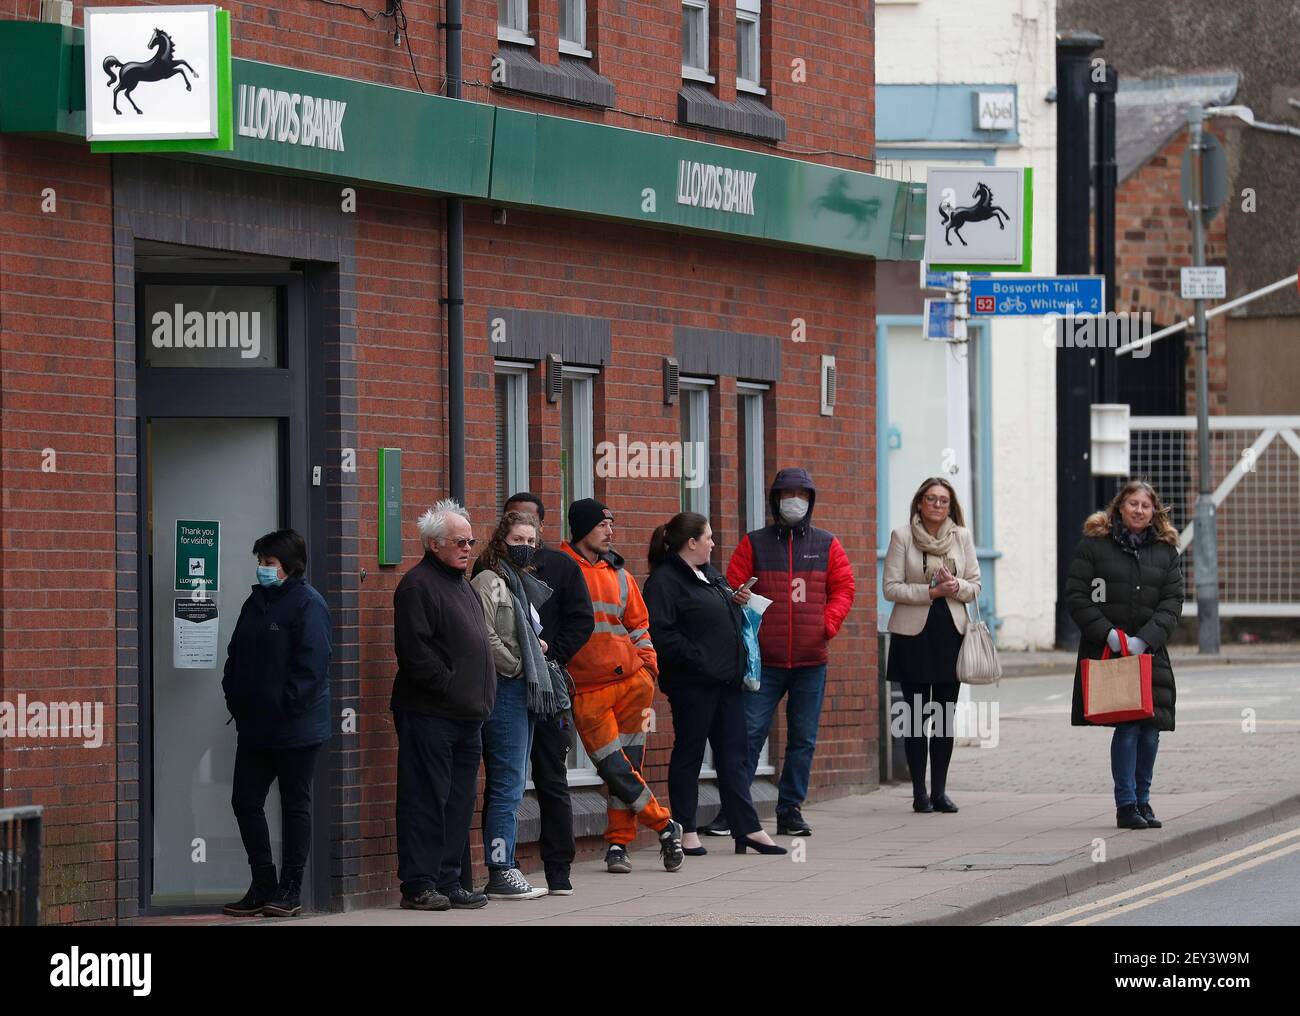 Coalville, Leicestershire, UK. 5th March 2021. Customers queue outside a Lloyds Bank. North West Leicestershire has the highest coronavirus rate in England according to the latest Public Health England figures. Credit Darren Staples/Alamy Live News. Stock Photo